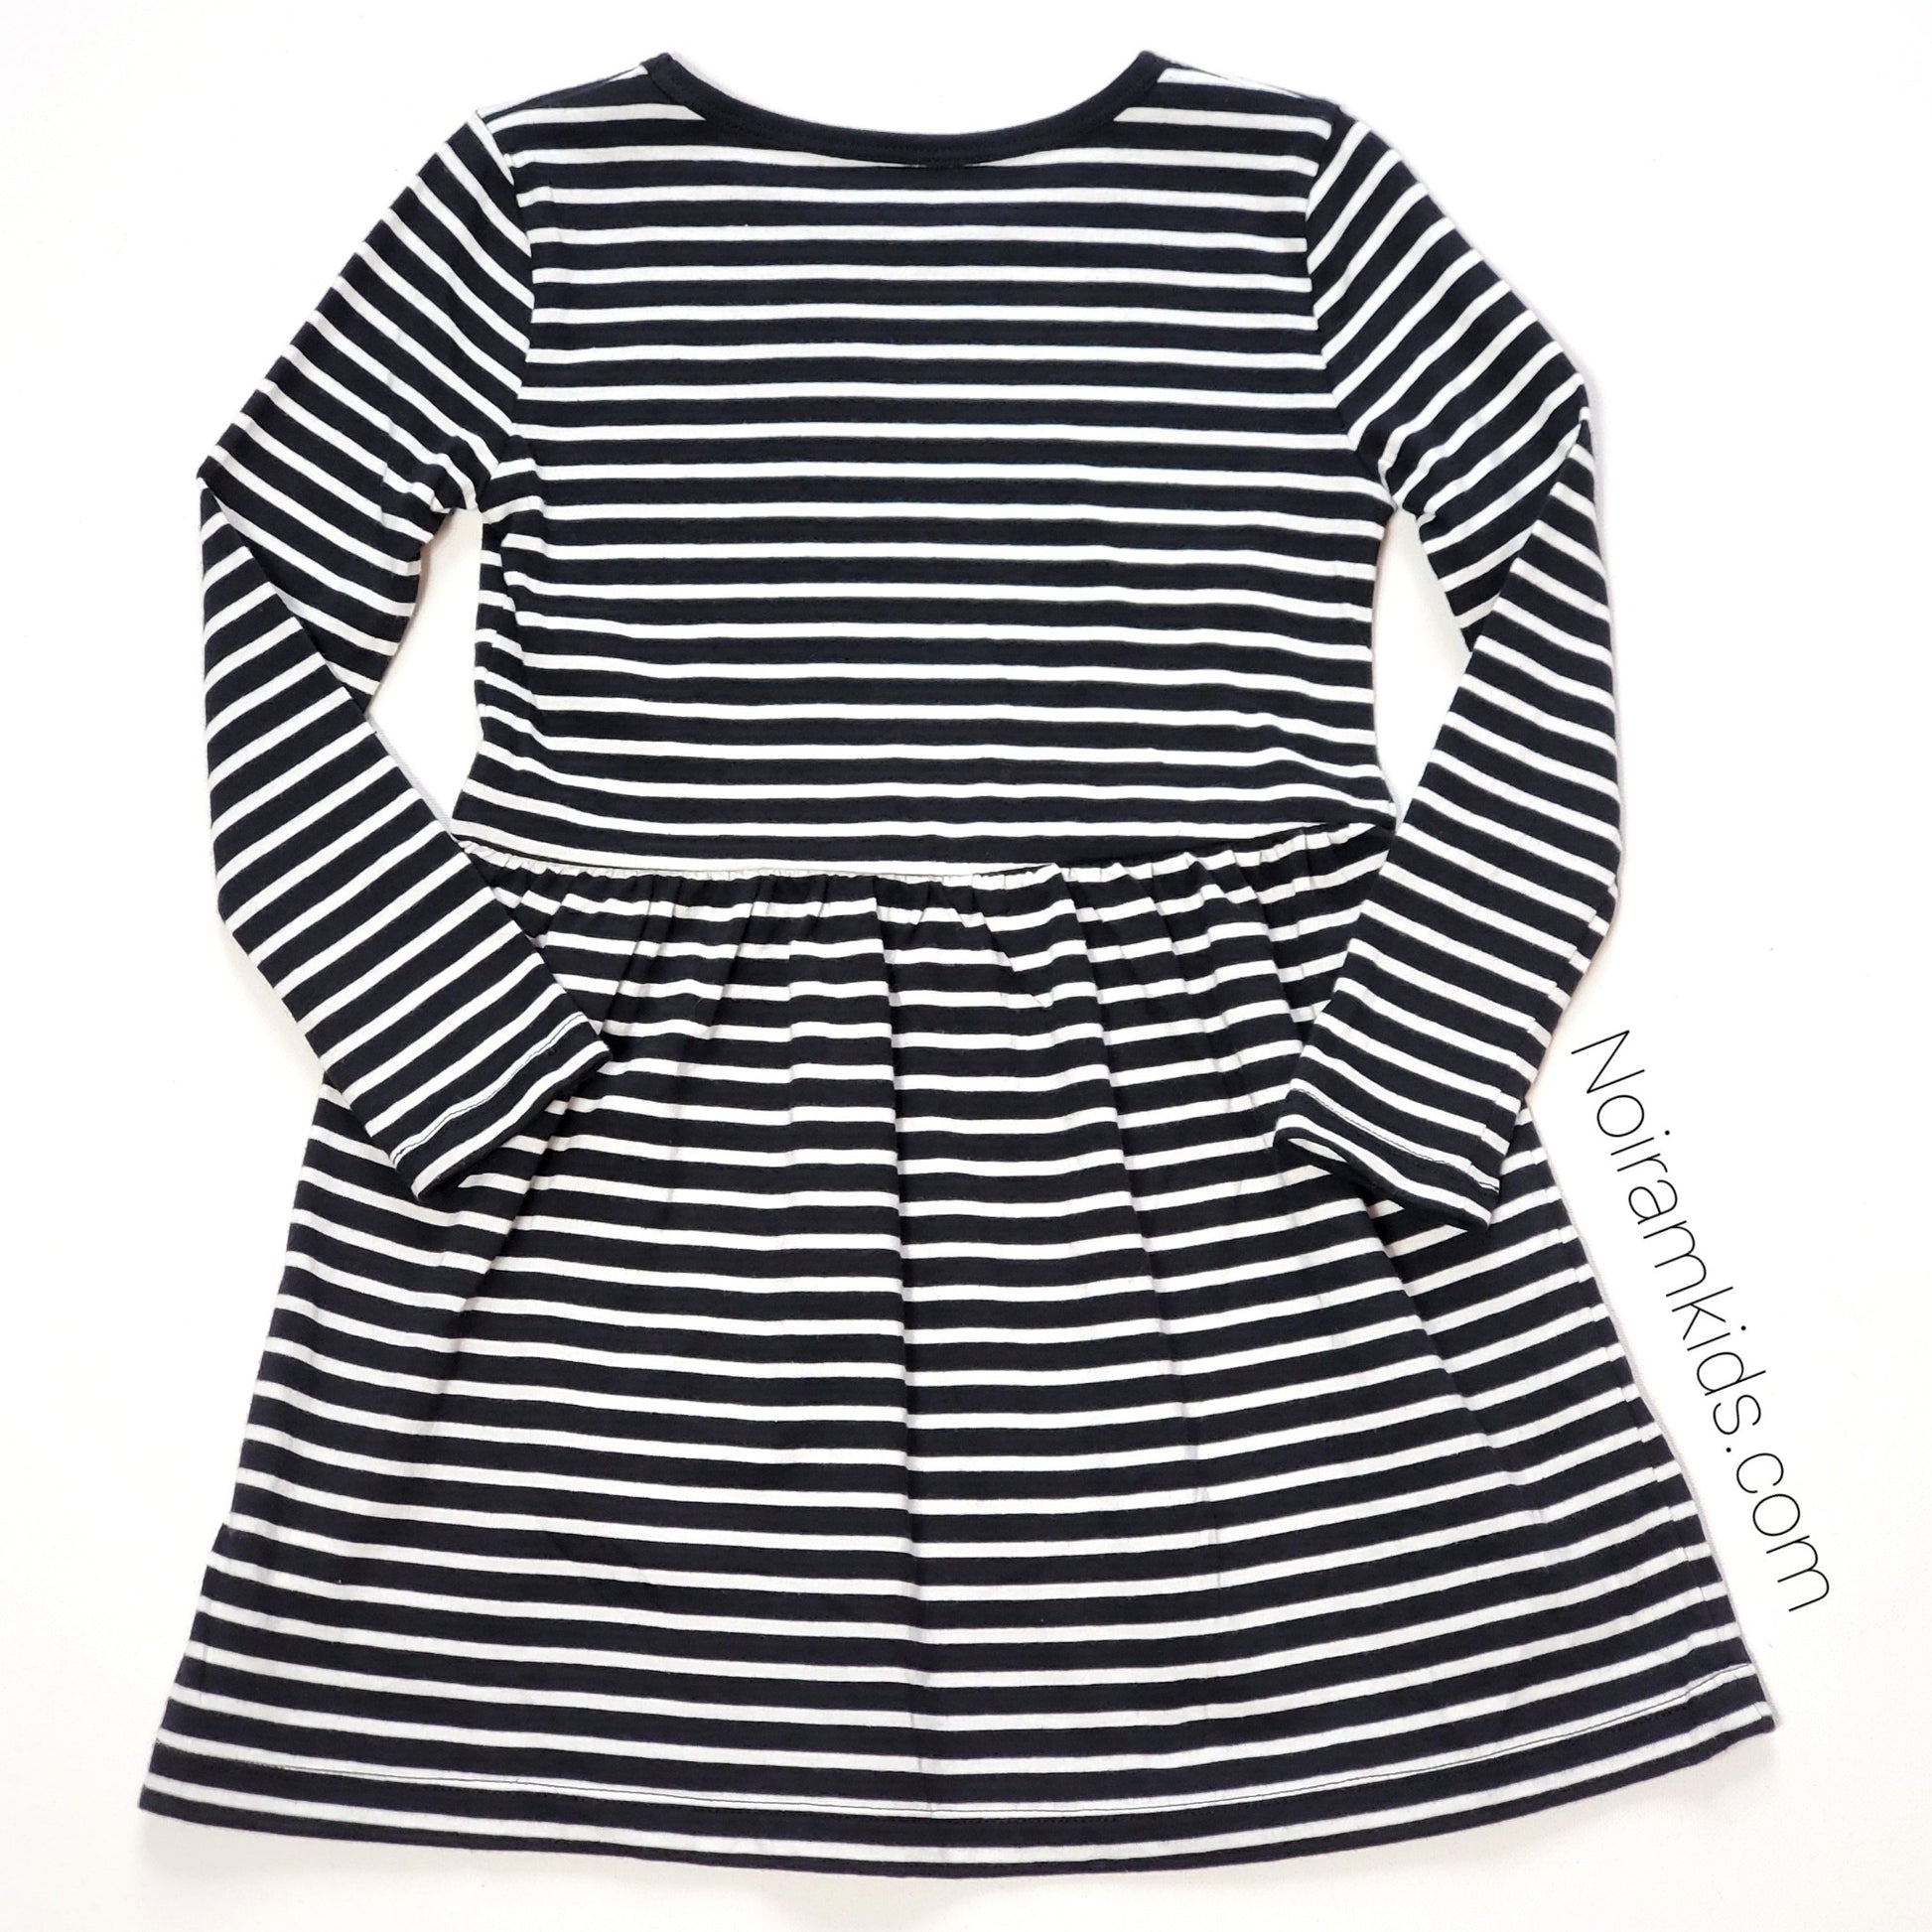 NWT Carters Girls Are the Future Dress 3T View 2